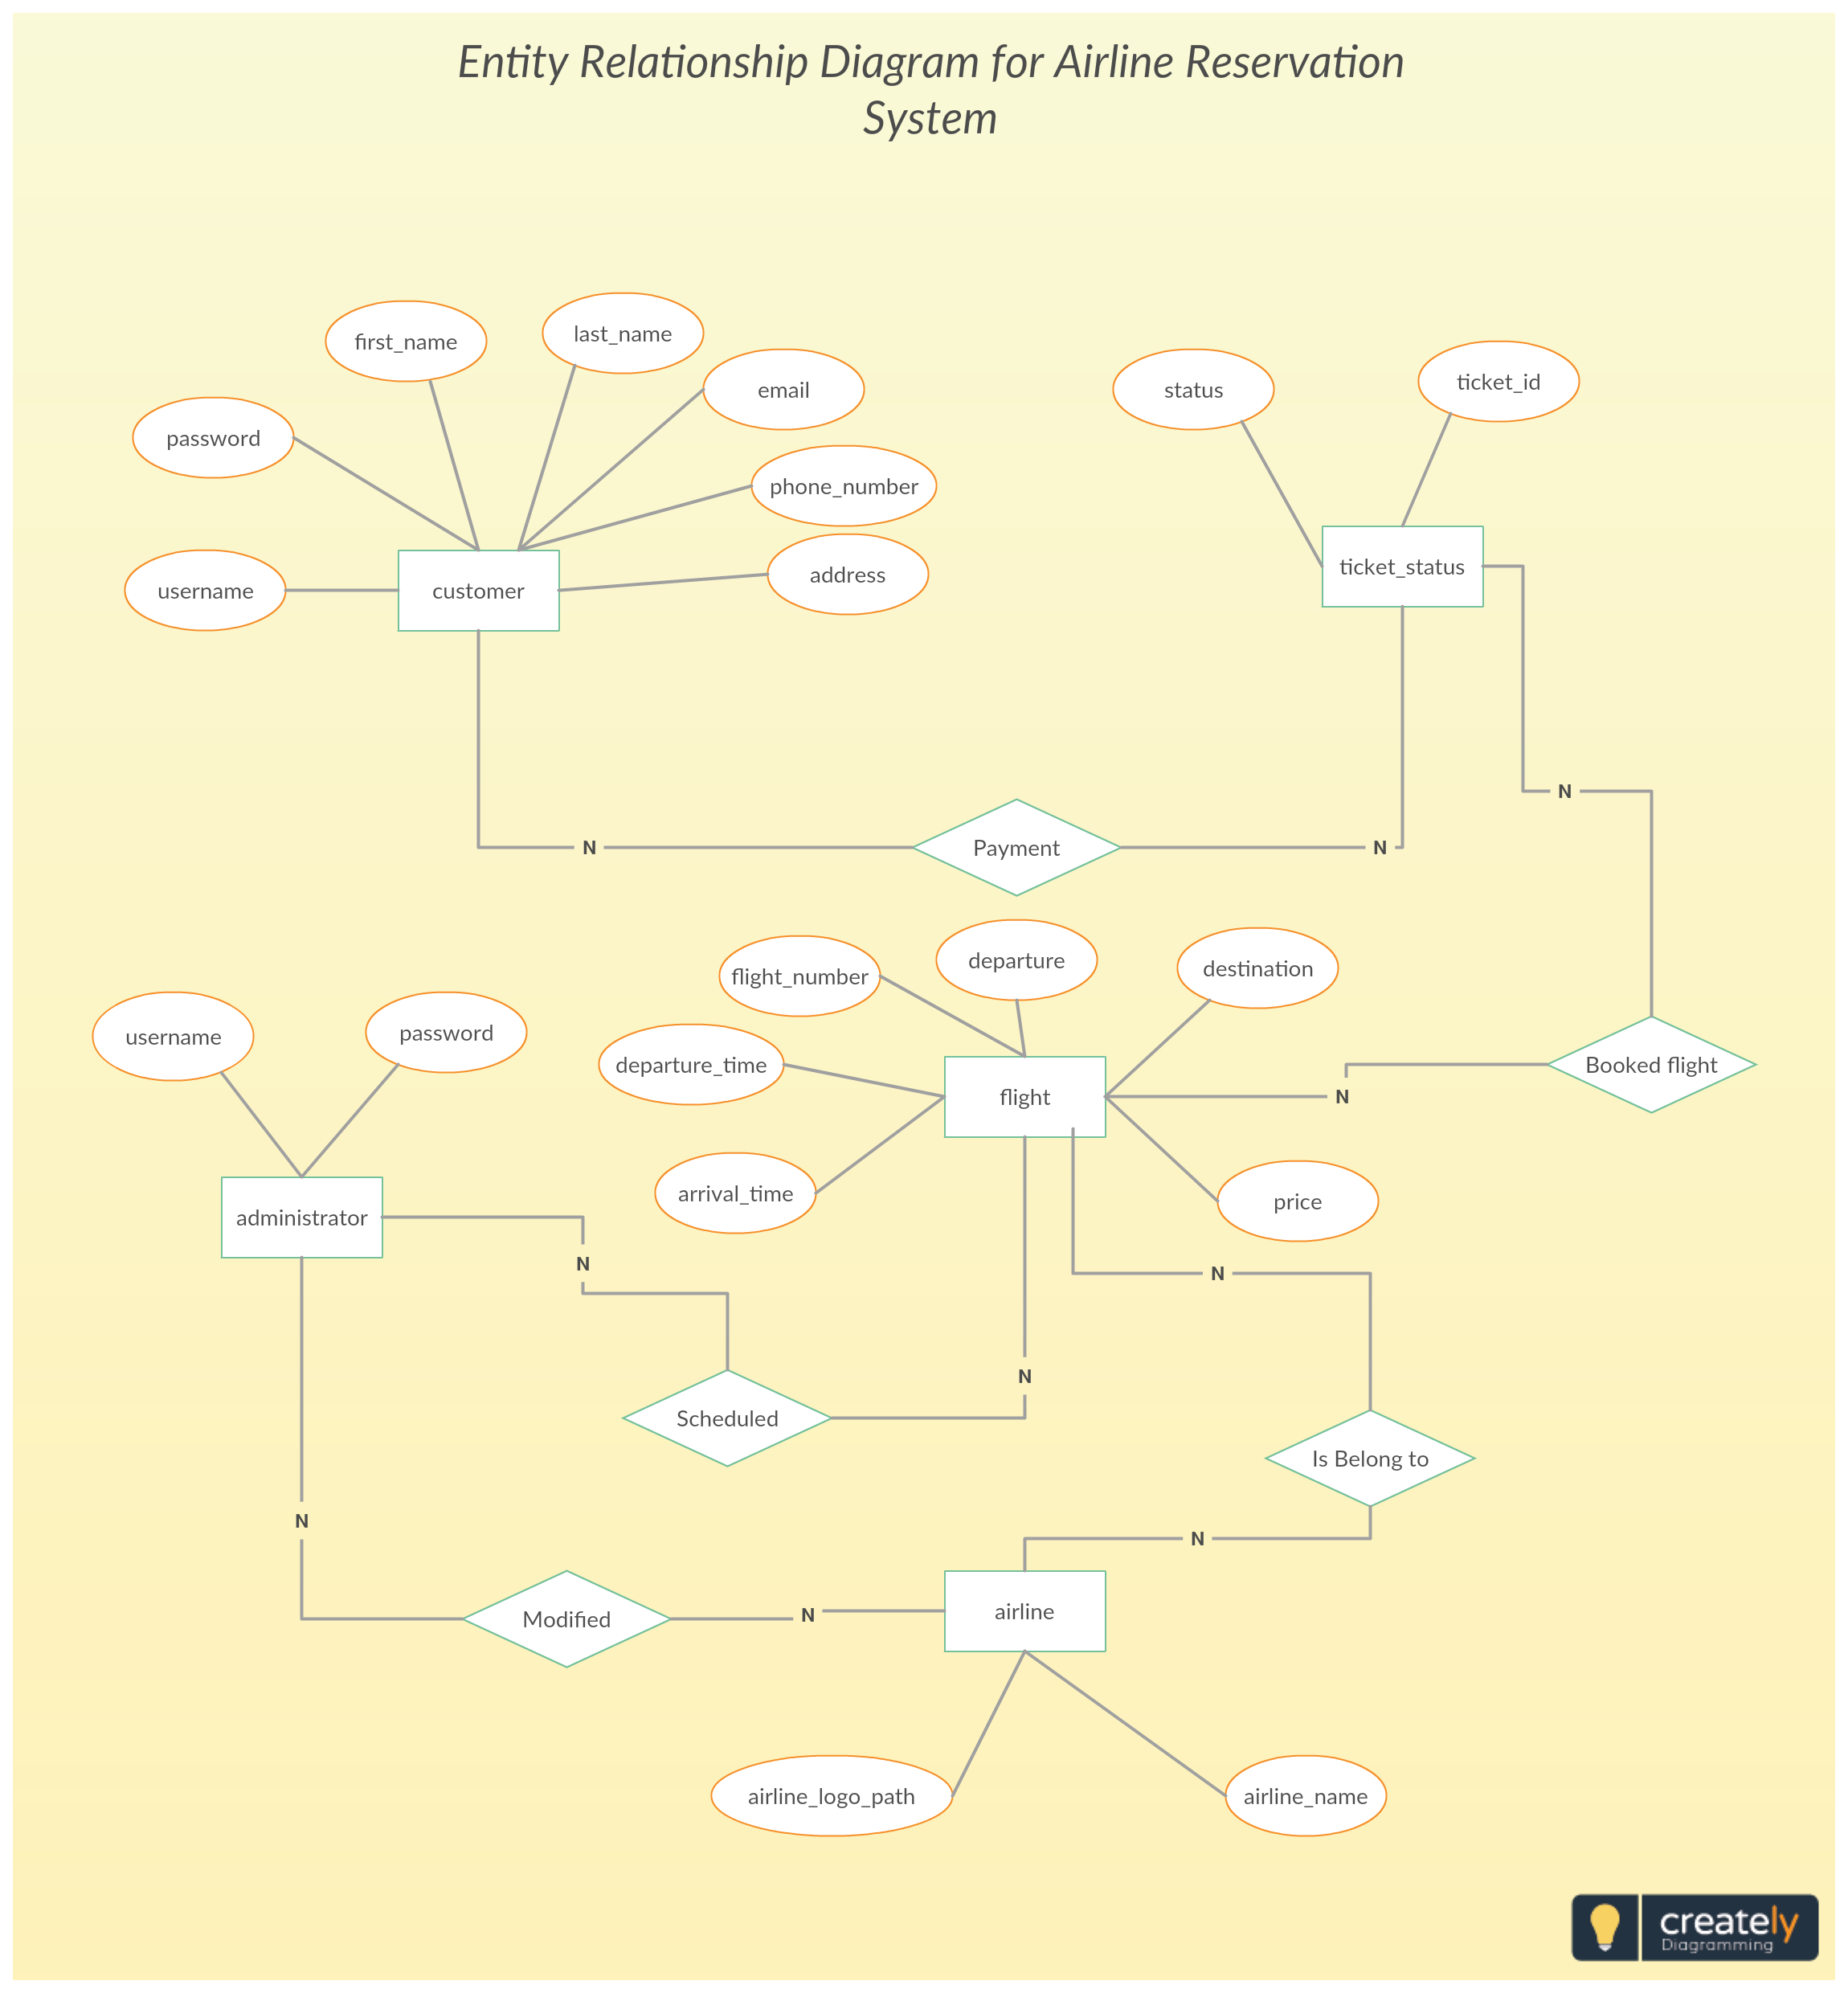 Entity Relationship Diagram For Airline Reservation System inside Entity Relationship Mapping